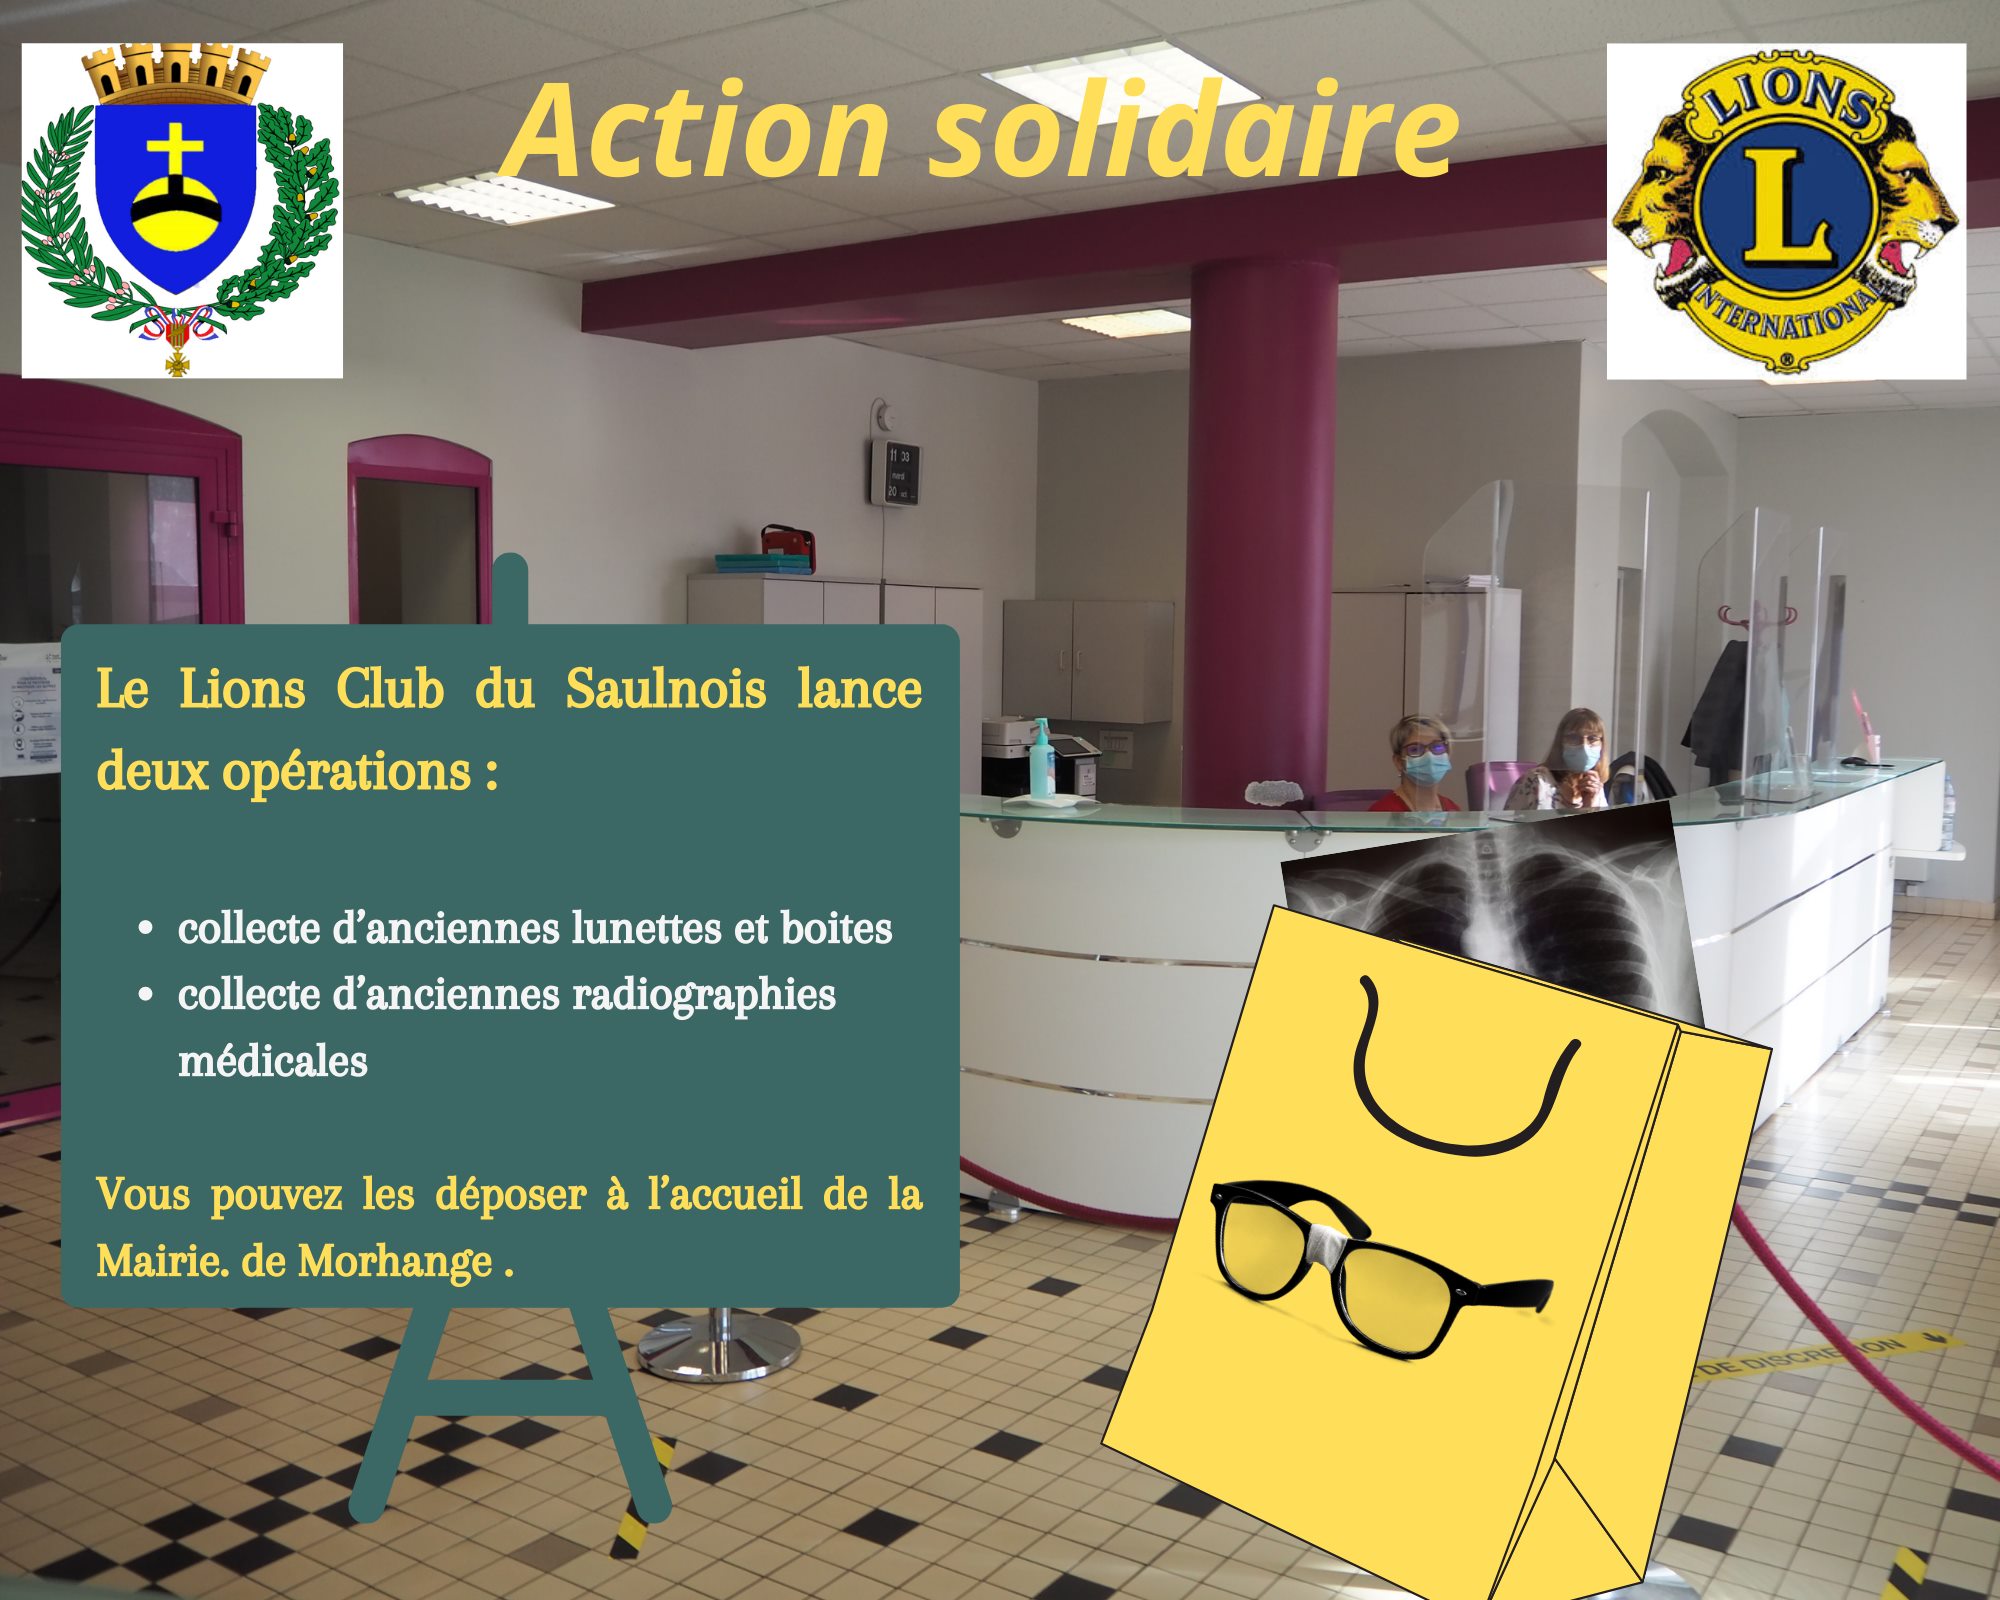 Action solidaire Lion's Club